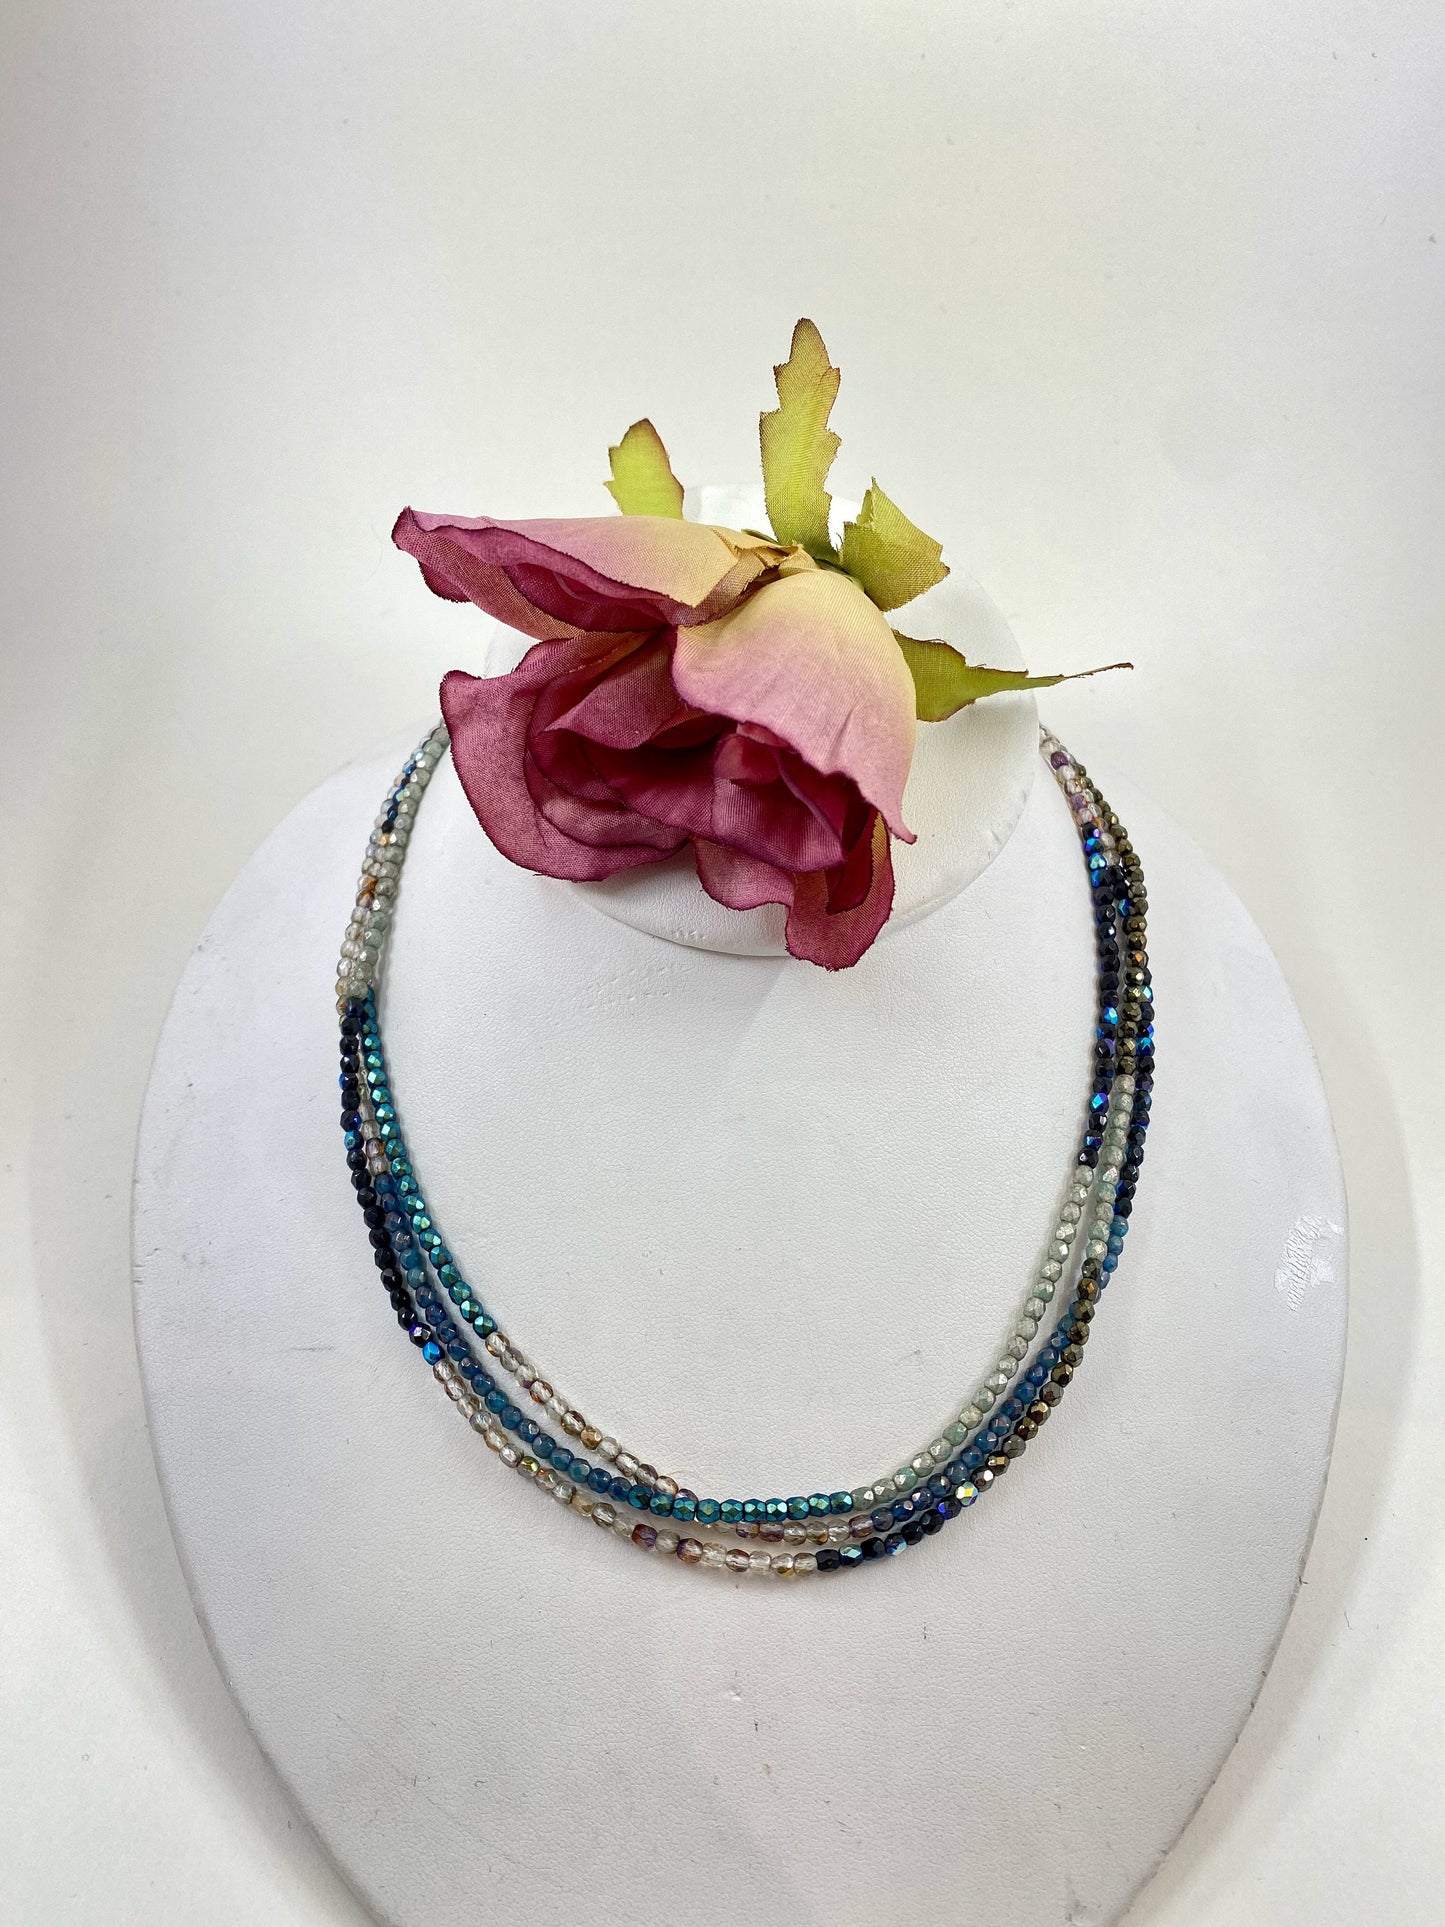 Stunning crystal necklace, with multi colors and designed to wear long or short. Finished with a quality gold filled magnetic clasp.